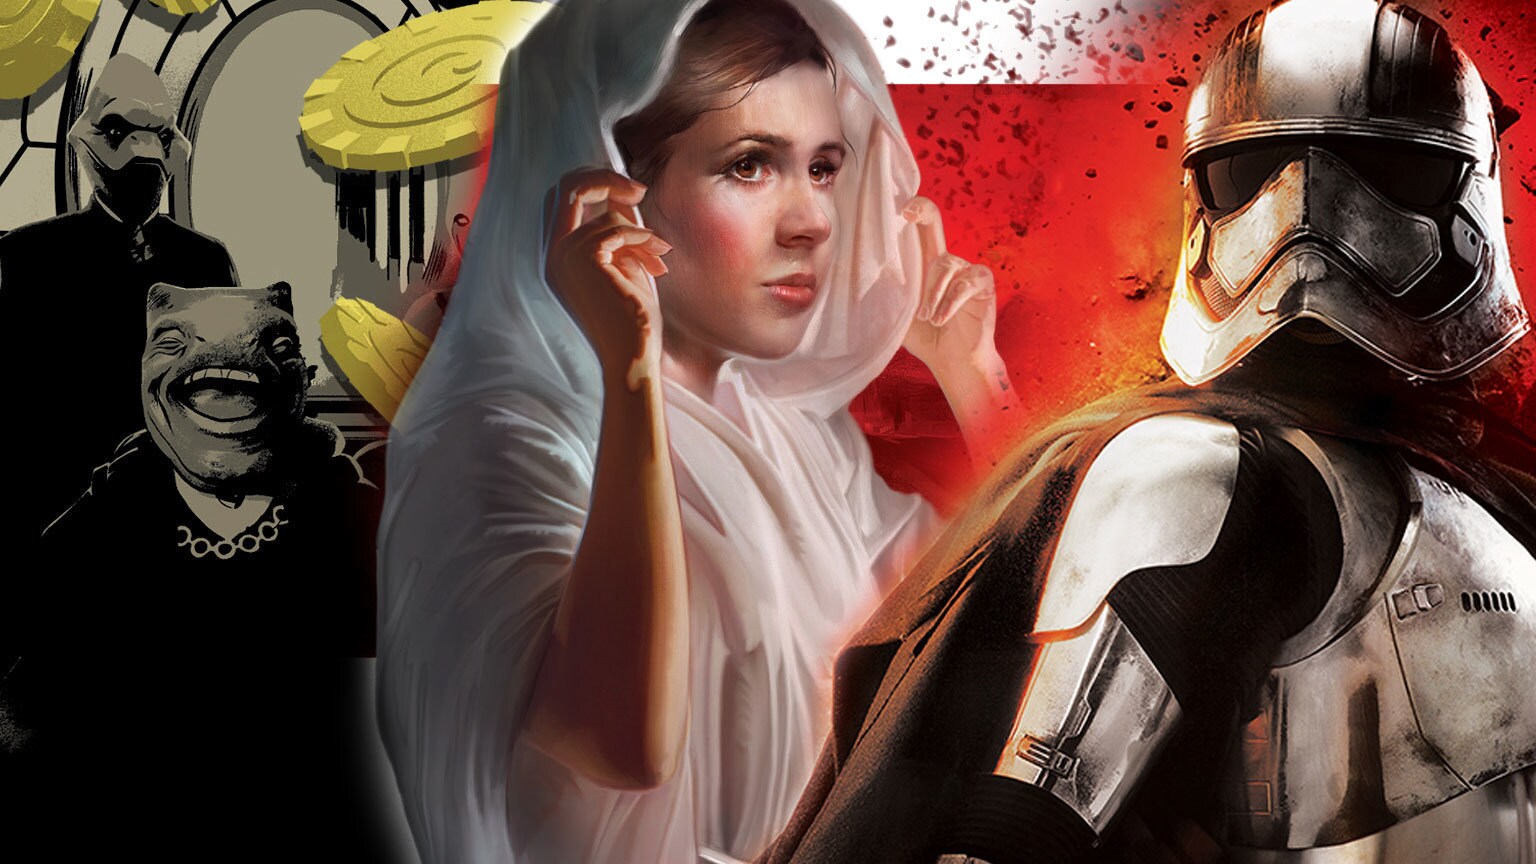 Poll: What New or Upcoming Star Wars Book Are You Most Excited About?